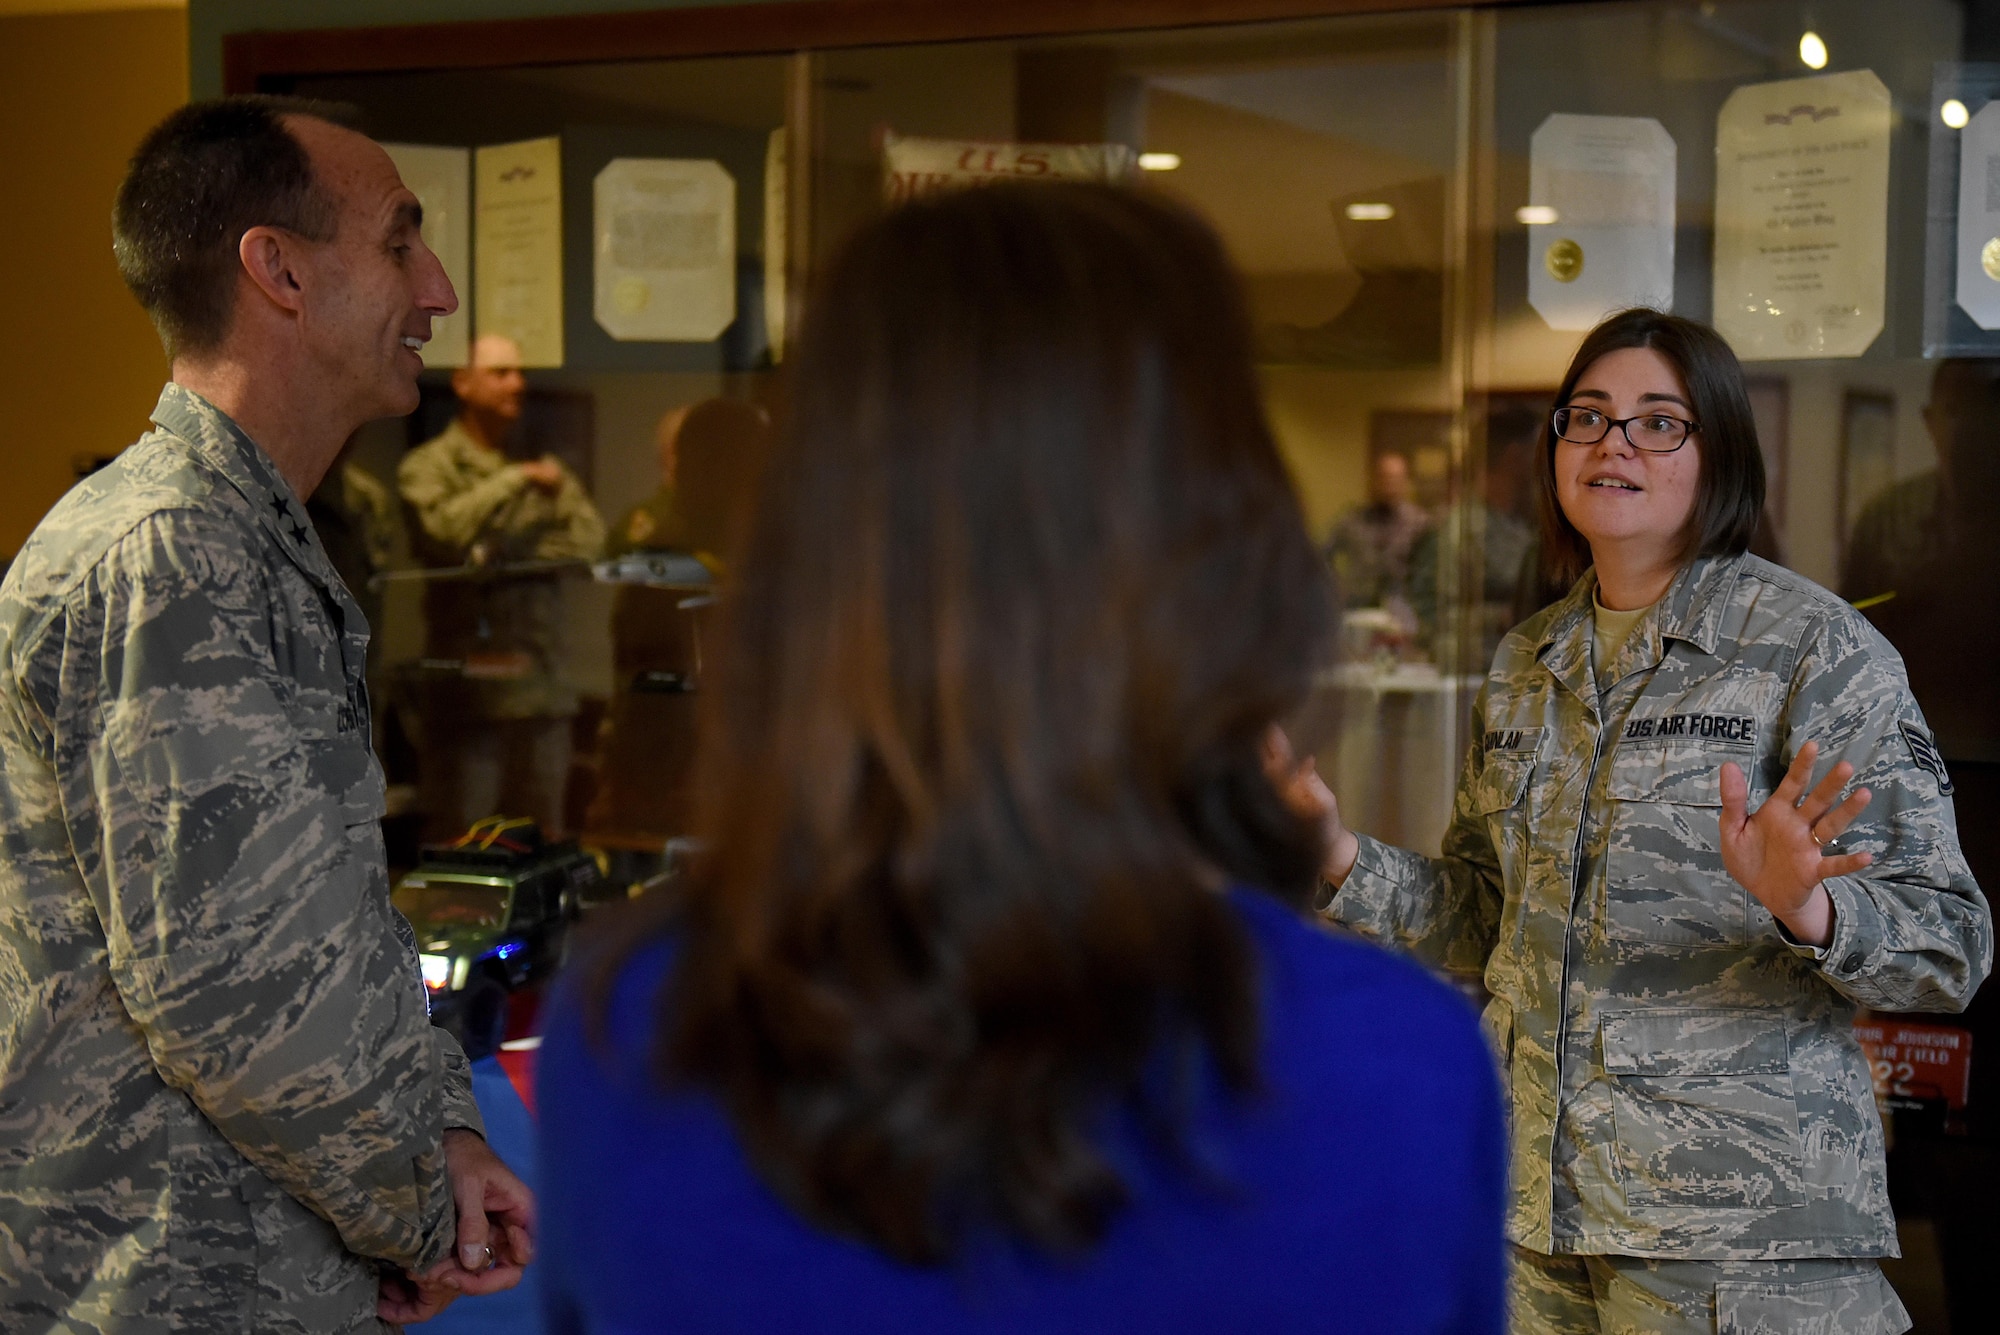 U.S. Air Force Maj. Gen. Scott Zobrist (left), 9th Air Force commander, discusses the Make It Better book club with Staff Sgt. Catherine Quinlan (right), 4th Force Support Squadron manpower analyst at Seymour Johnson Air Force Base, N.C., Feb. 15, 2017. Quinlan is the president of the book club which has more than 100 members. (U.S. Air Force photo by Airman 1st Class Kenneth Boyton)